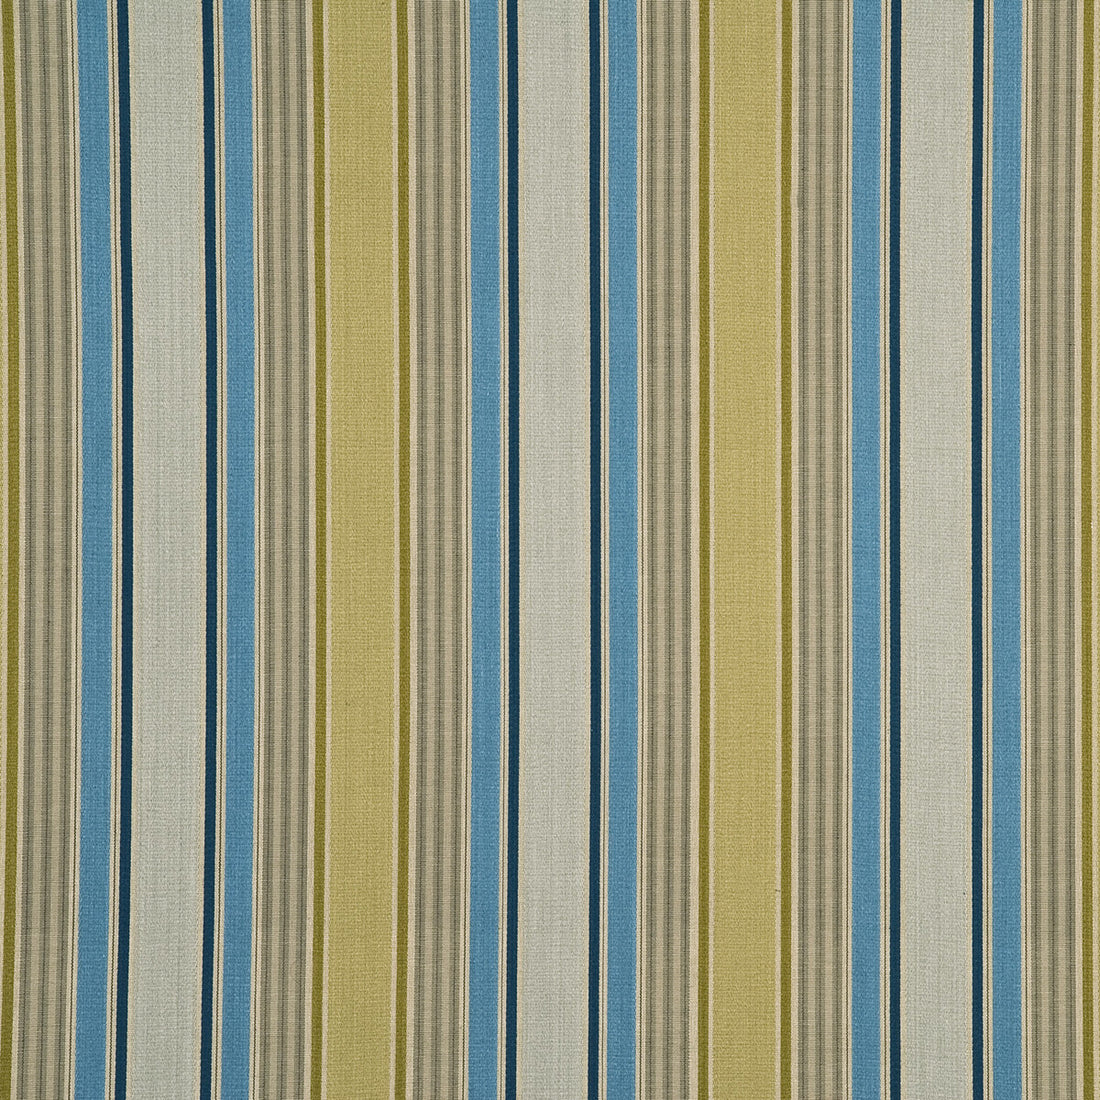 Arley Stripe fabric in teal/green color - pattern BF10401.5.0 - by G P &amp; J Baker in the Holcott collection